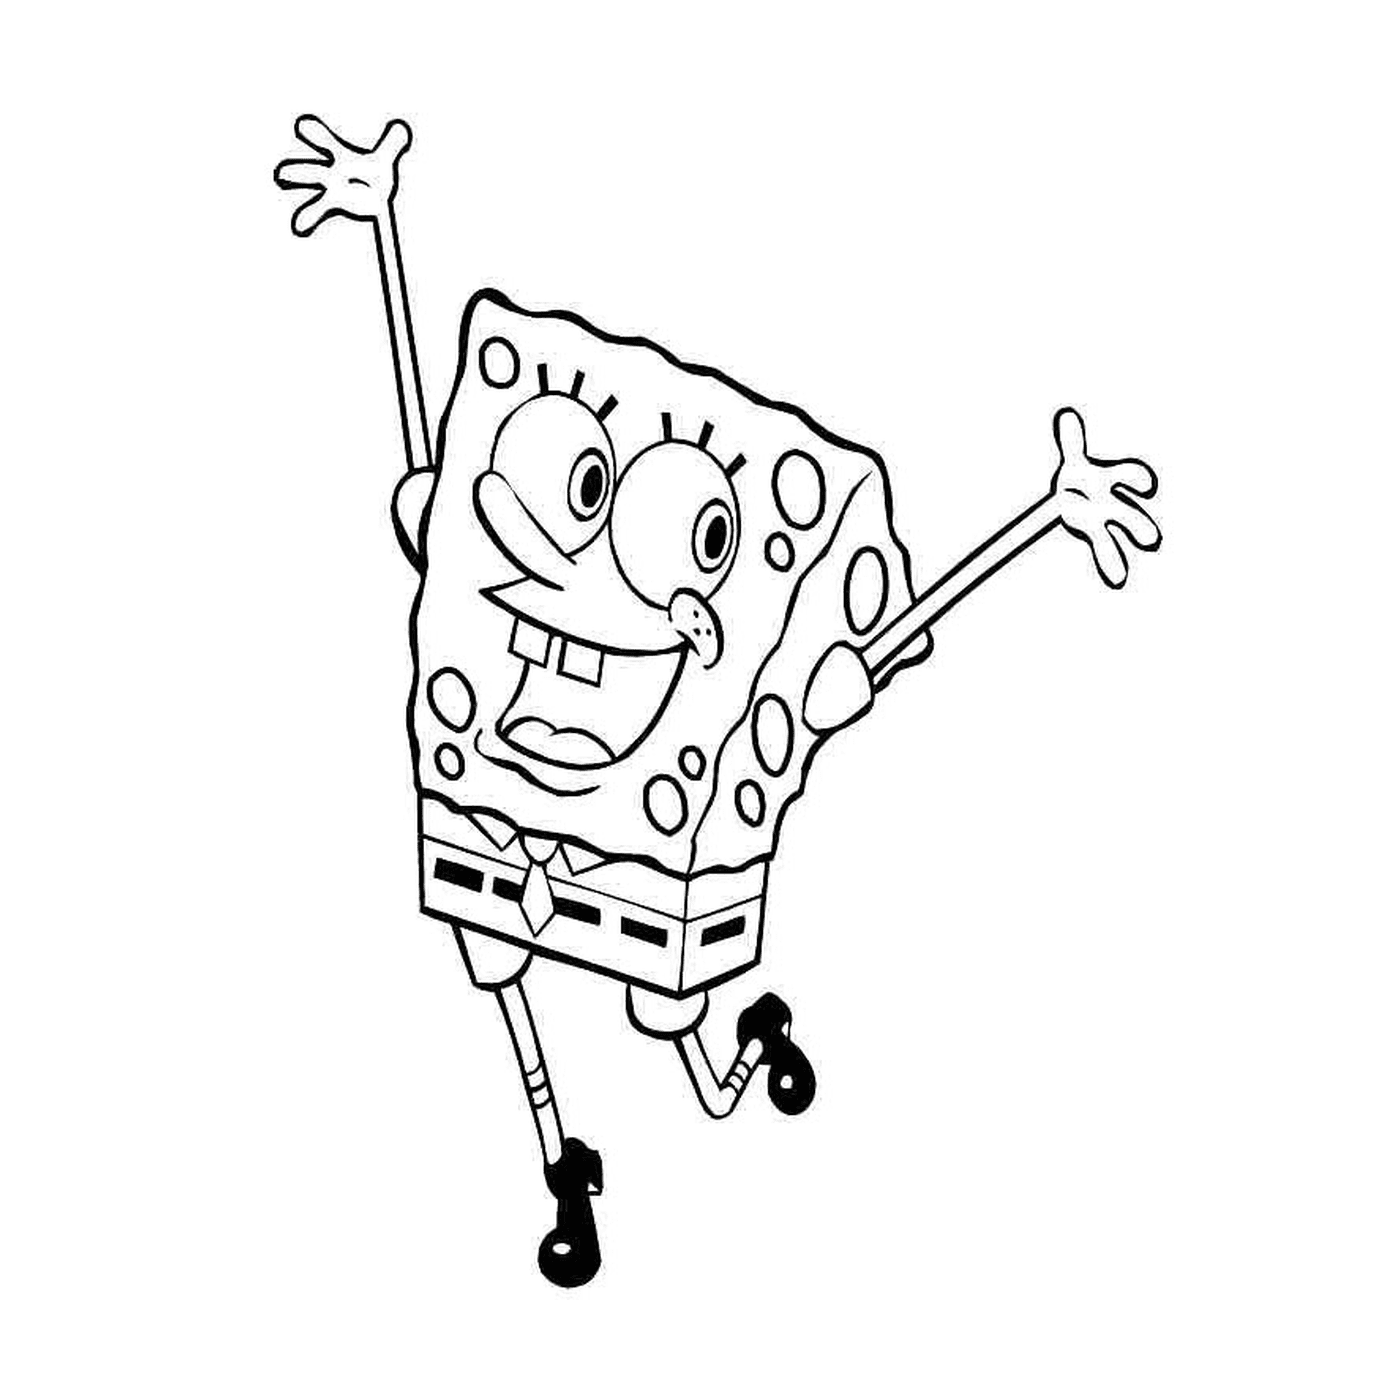  A character from SpongeBob 